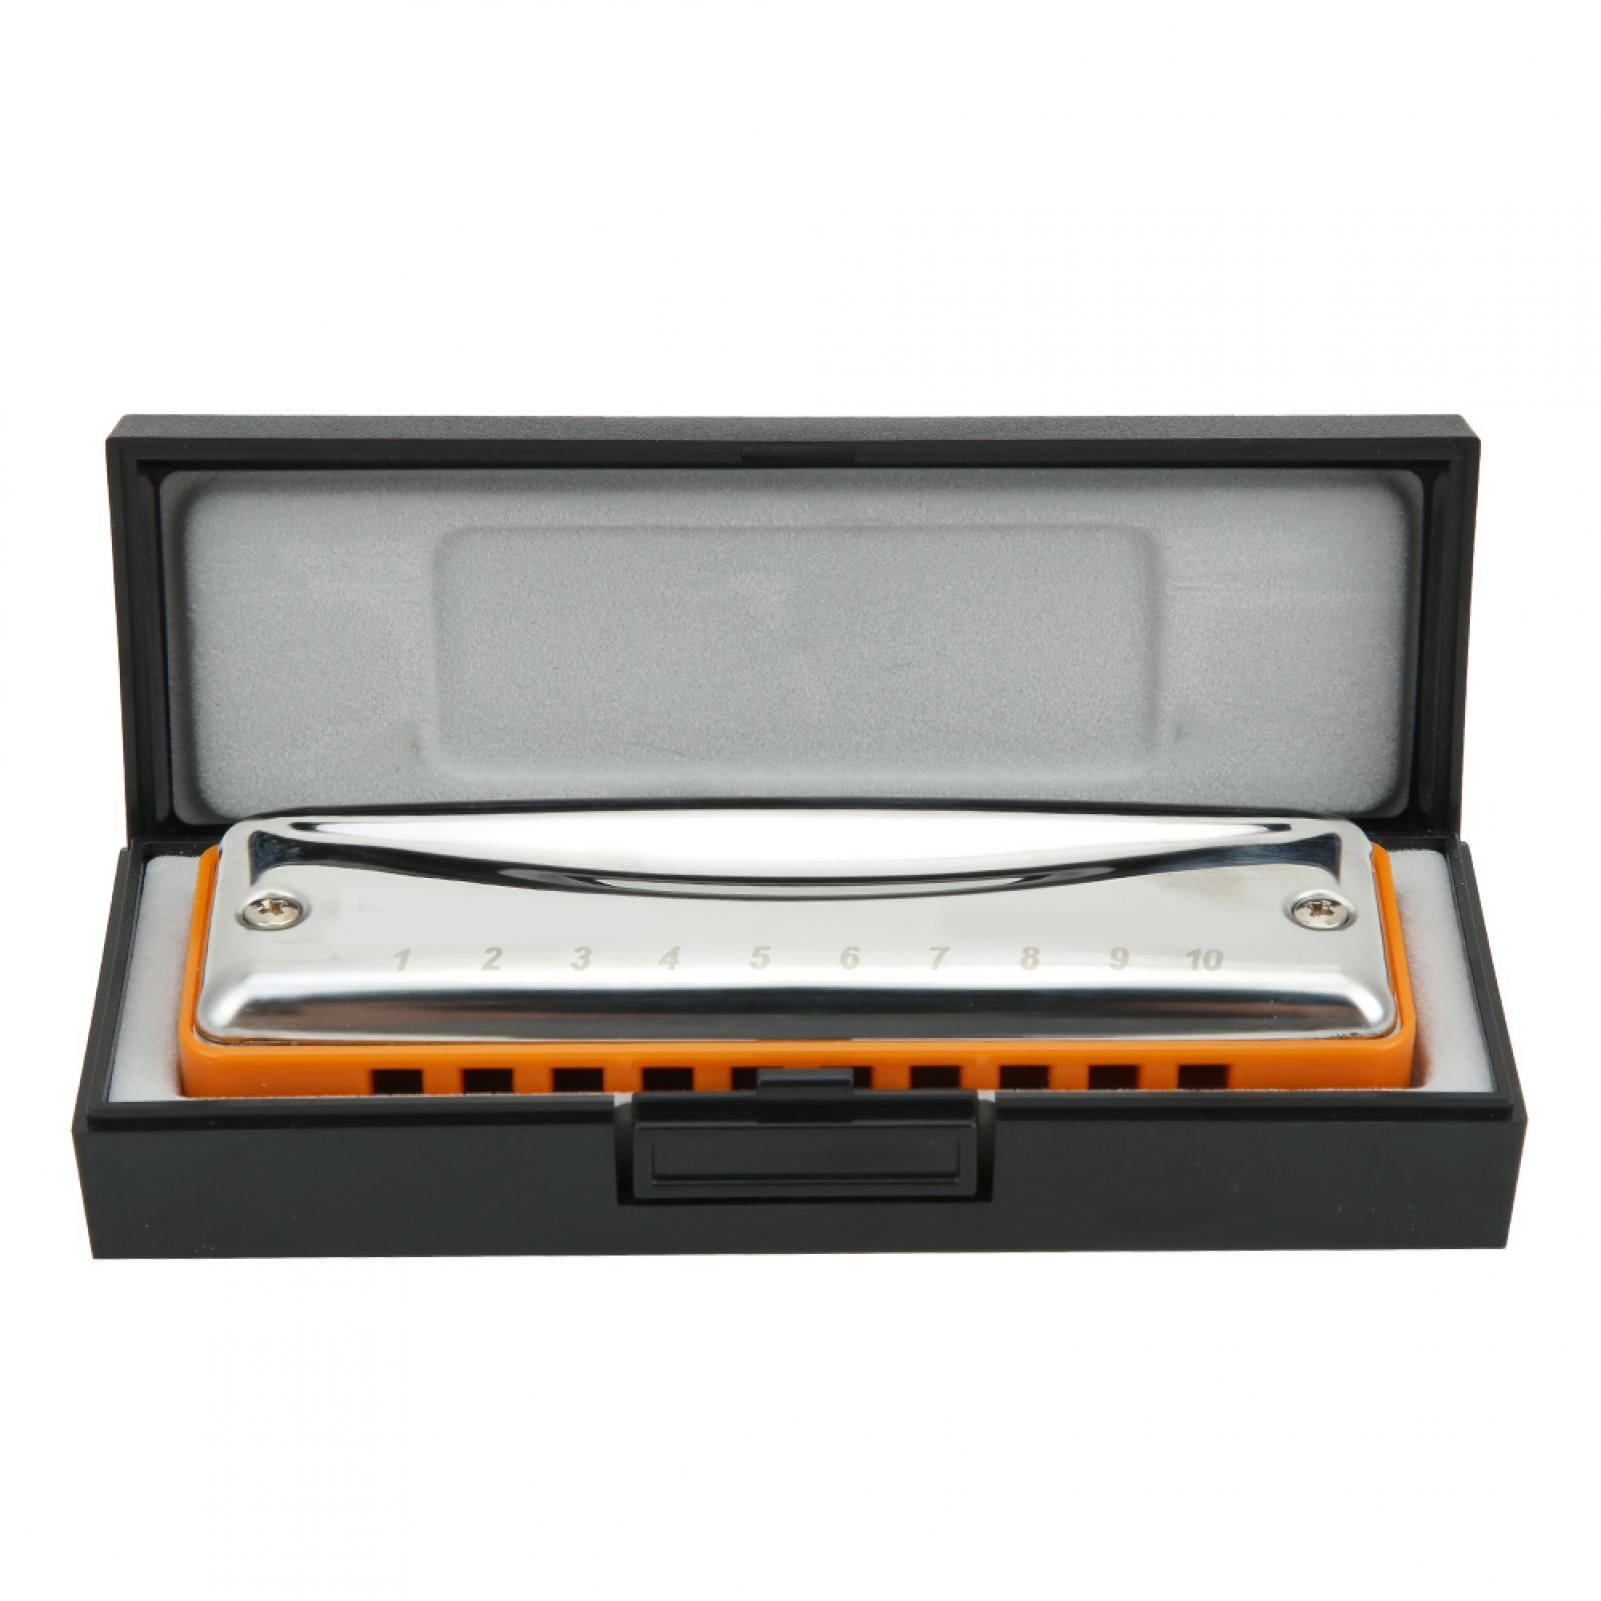 Accurate Tolerance Ratio Blues Harp Orange Long Service Life Transparent and Bright Color Professional Mouthorgan for Music Performance Music Enthusiast